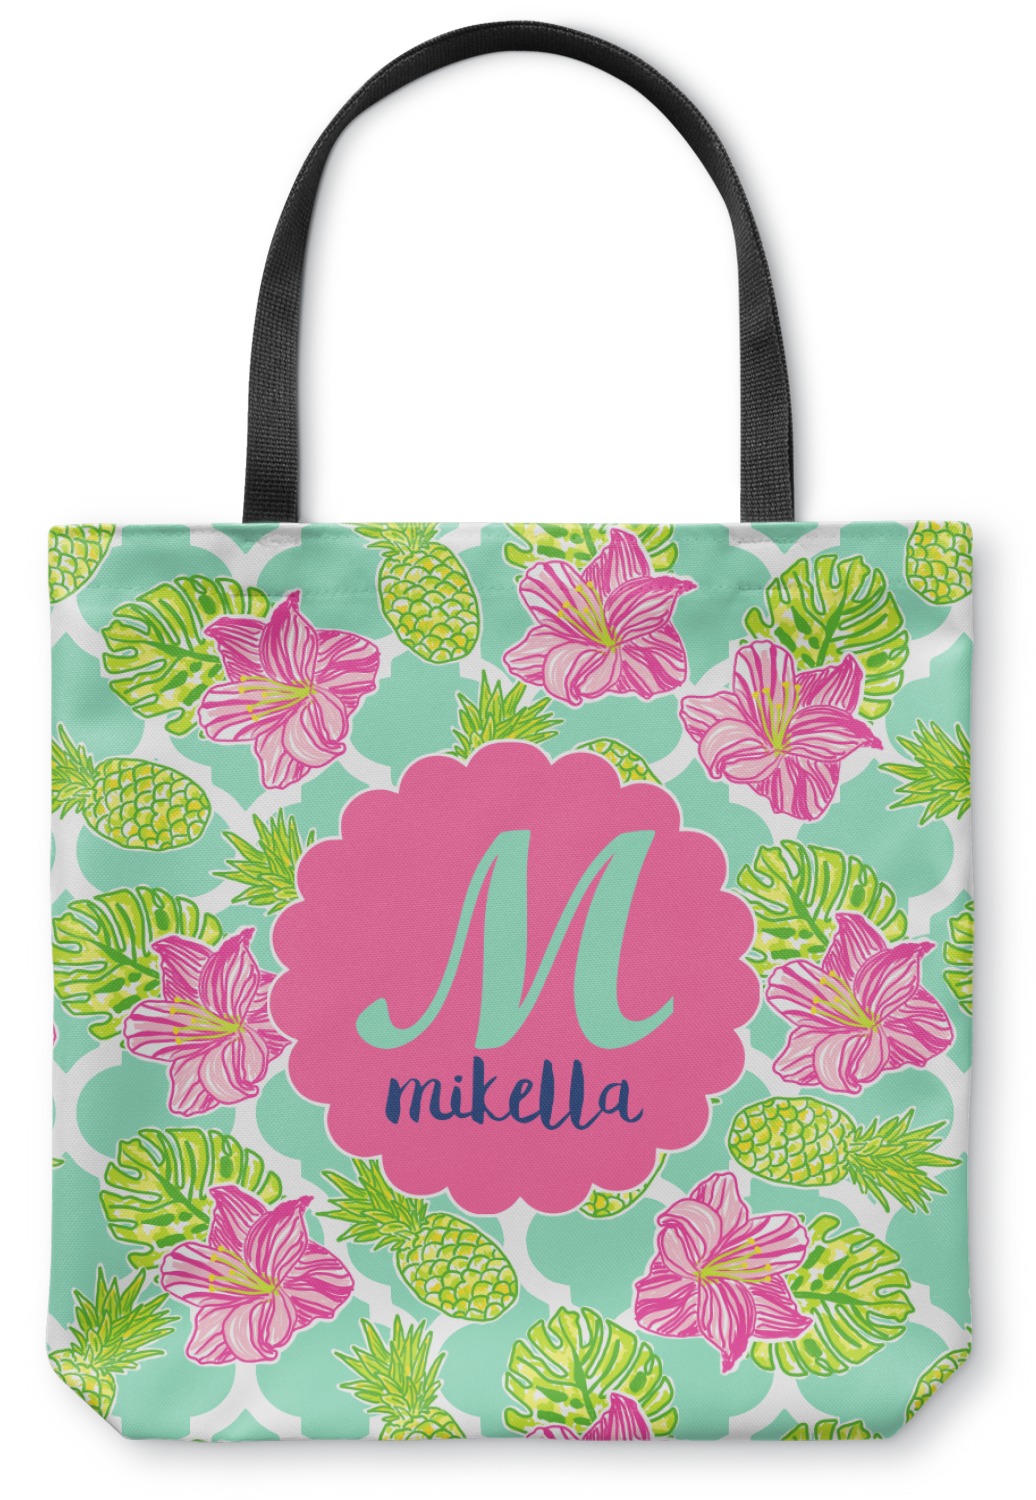 Preppy Hibiscus Canvas Tote Bag (Personalized) - YouCustomizeIt